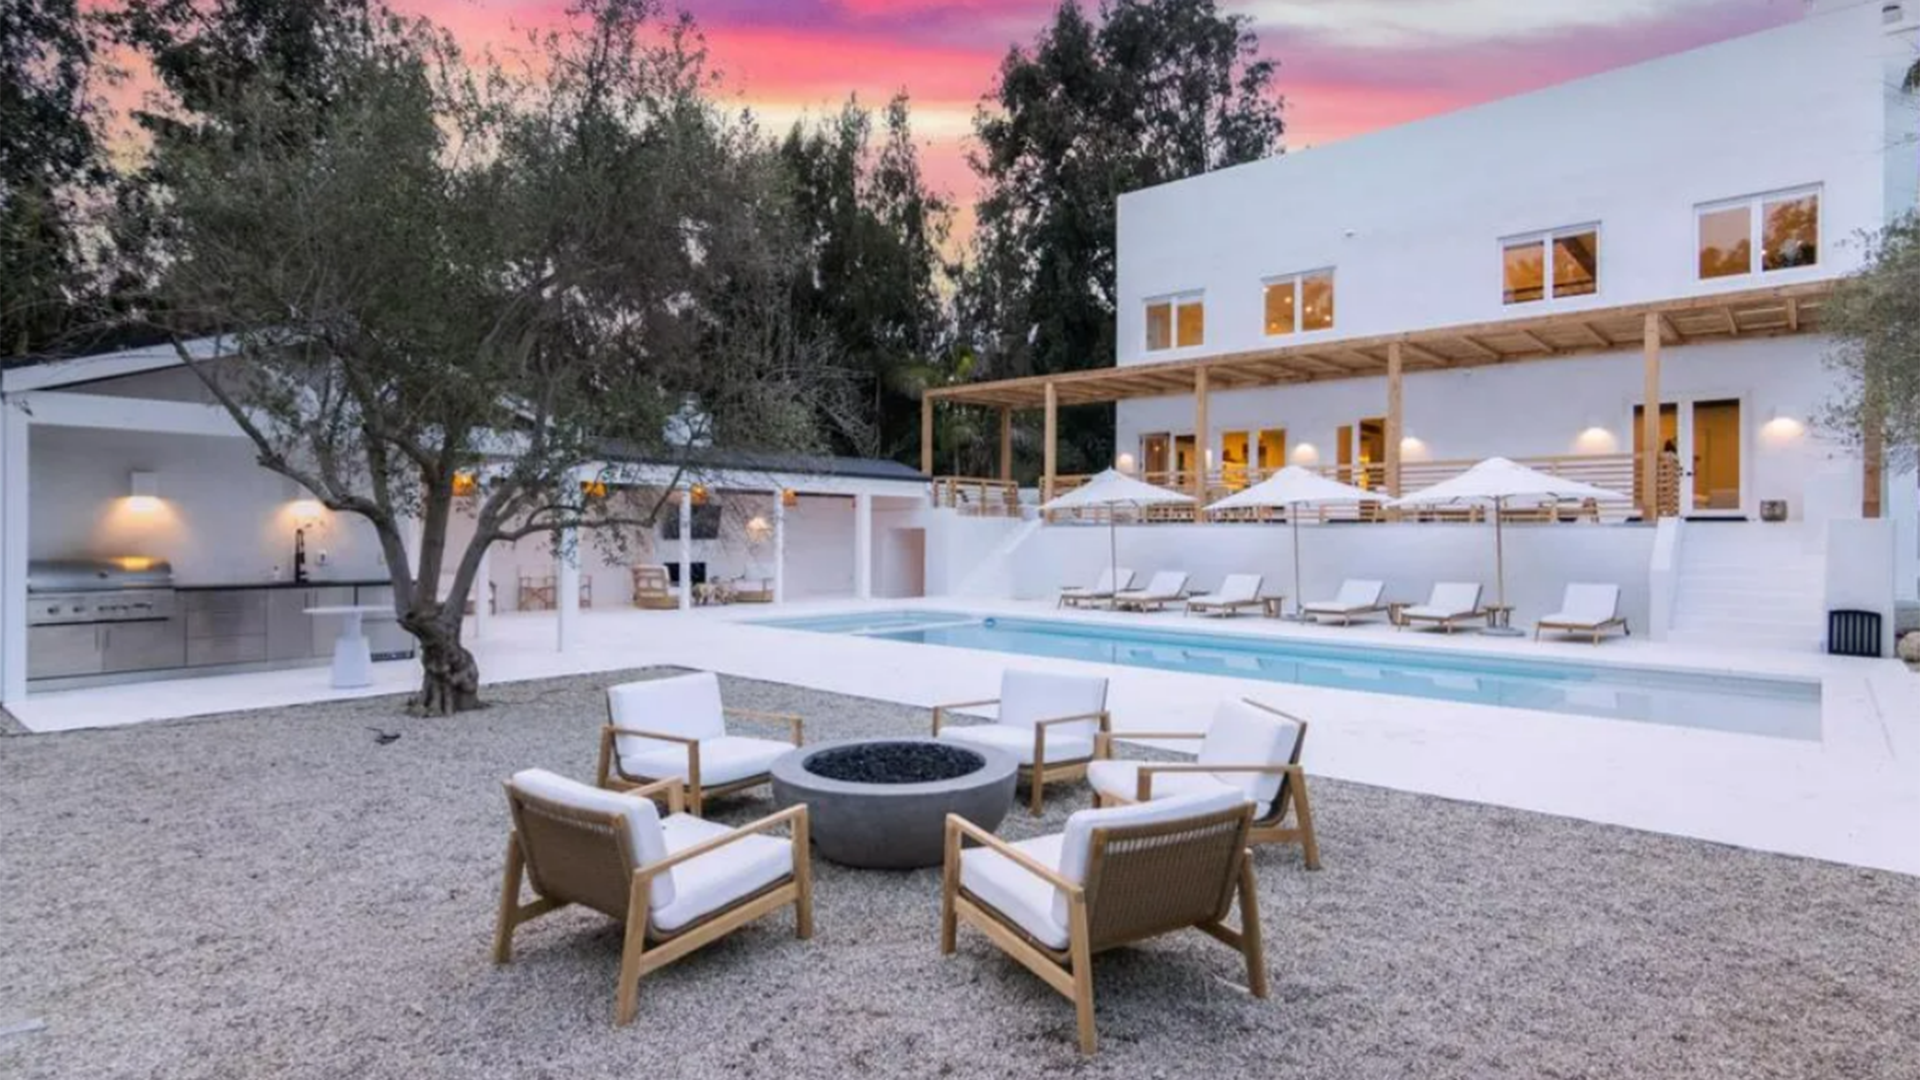 This Malibu mansion costs $3 million - but there's a catch